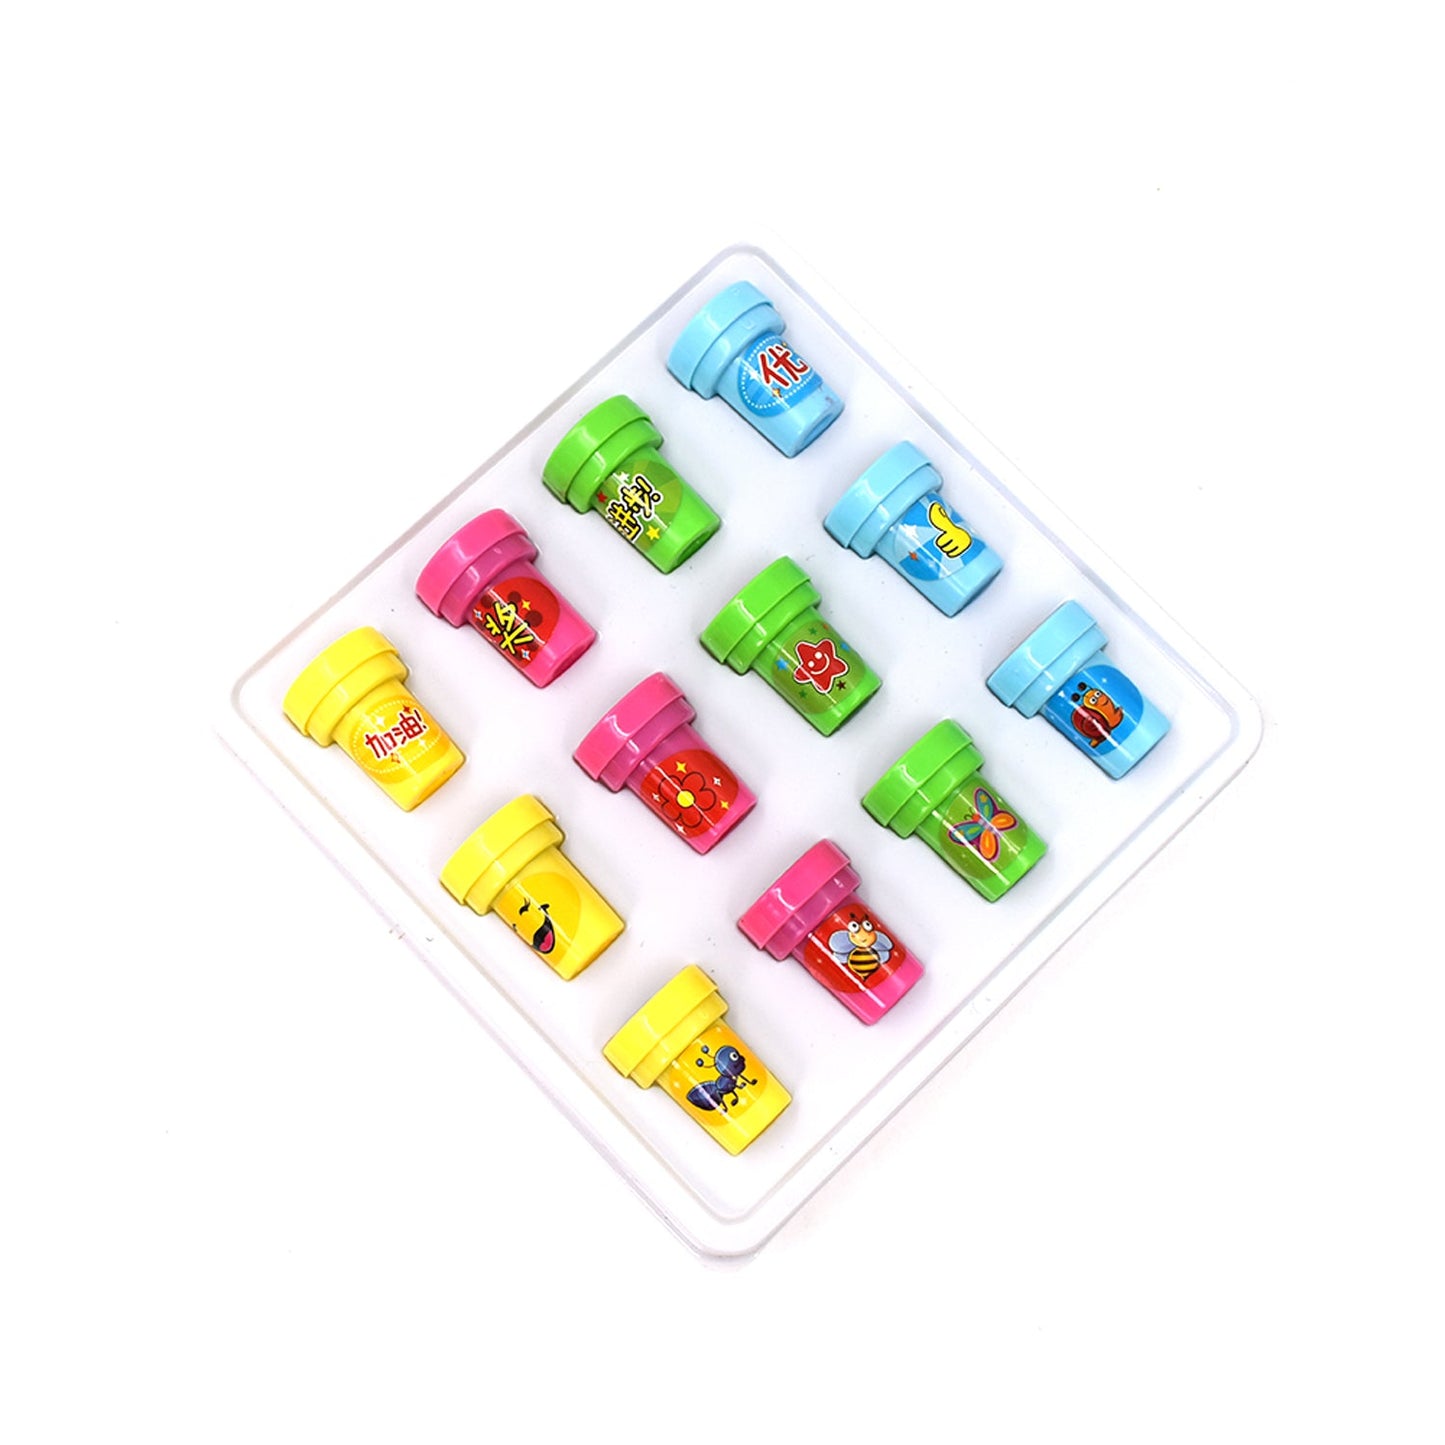 4805 12 Pc Stamp Set used in all types of household places by kids and children’s for playing purposes. 